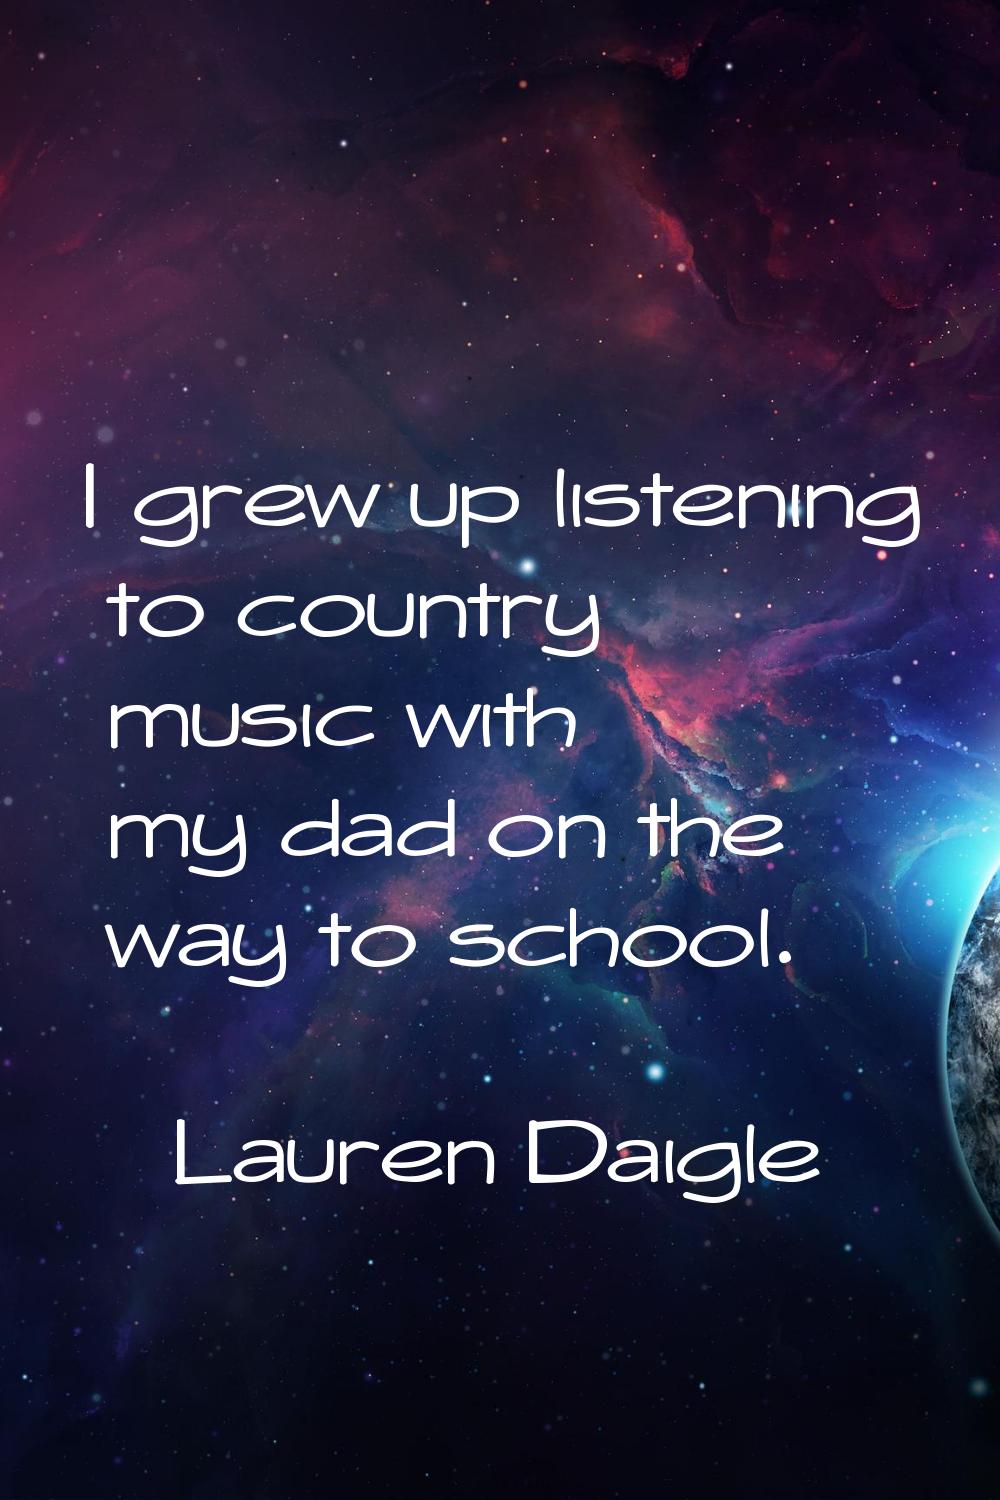 I grew up listening to country music with my dad on the way to school.